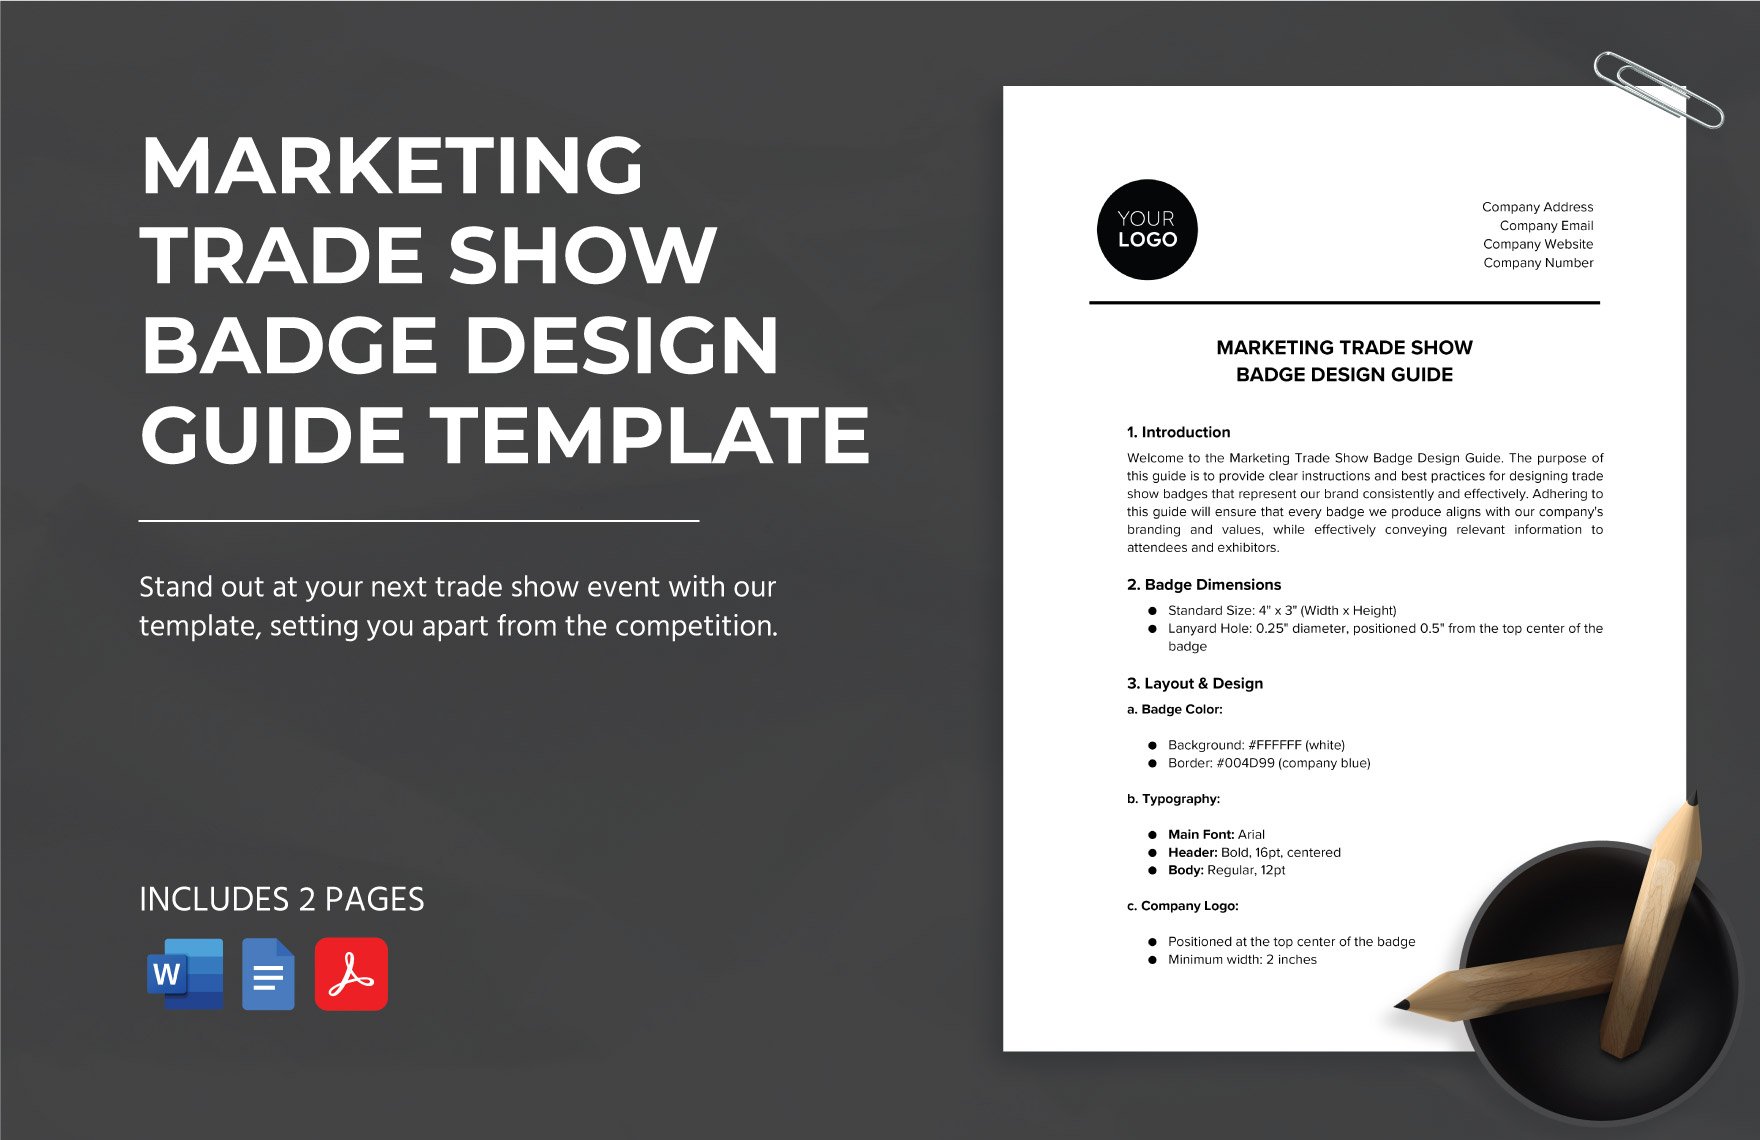 Marketing Trade Show Badge Design Guide Template in Word, Google Docs, PDF